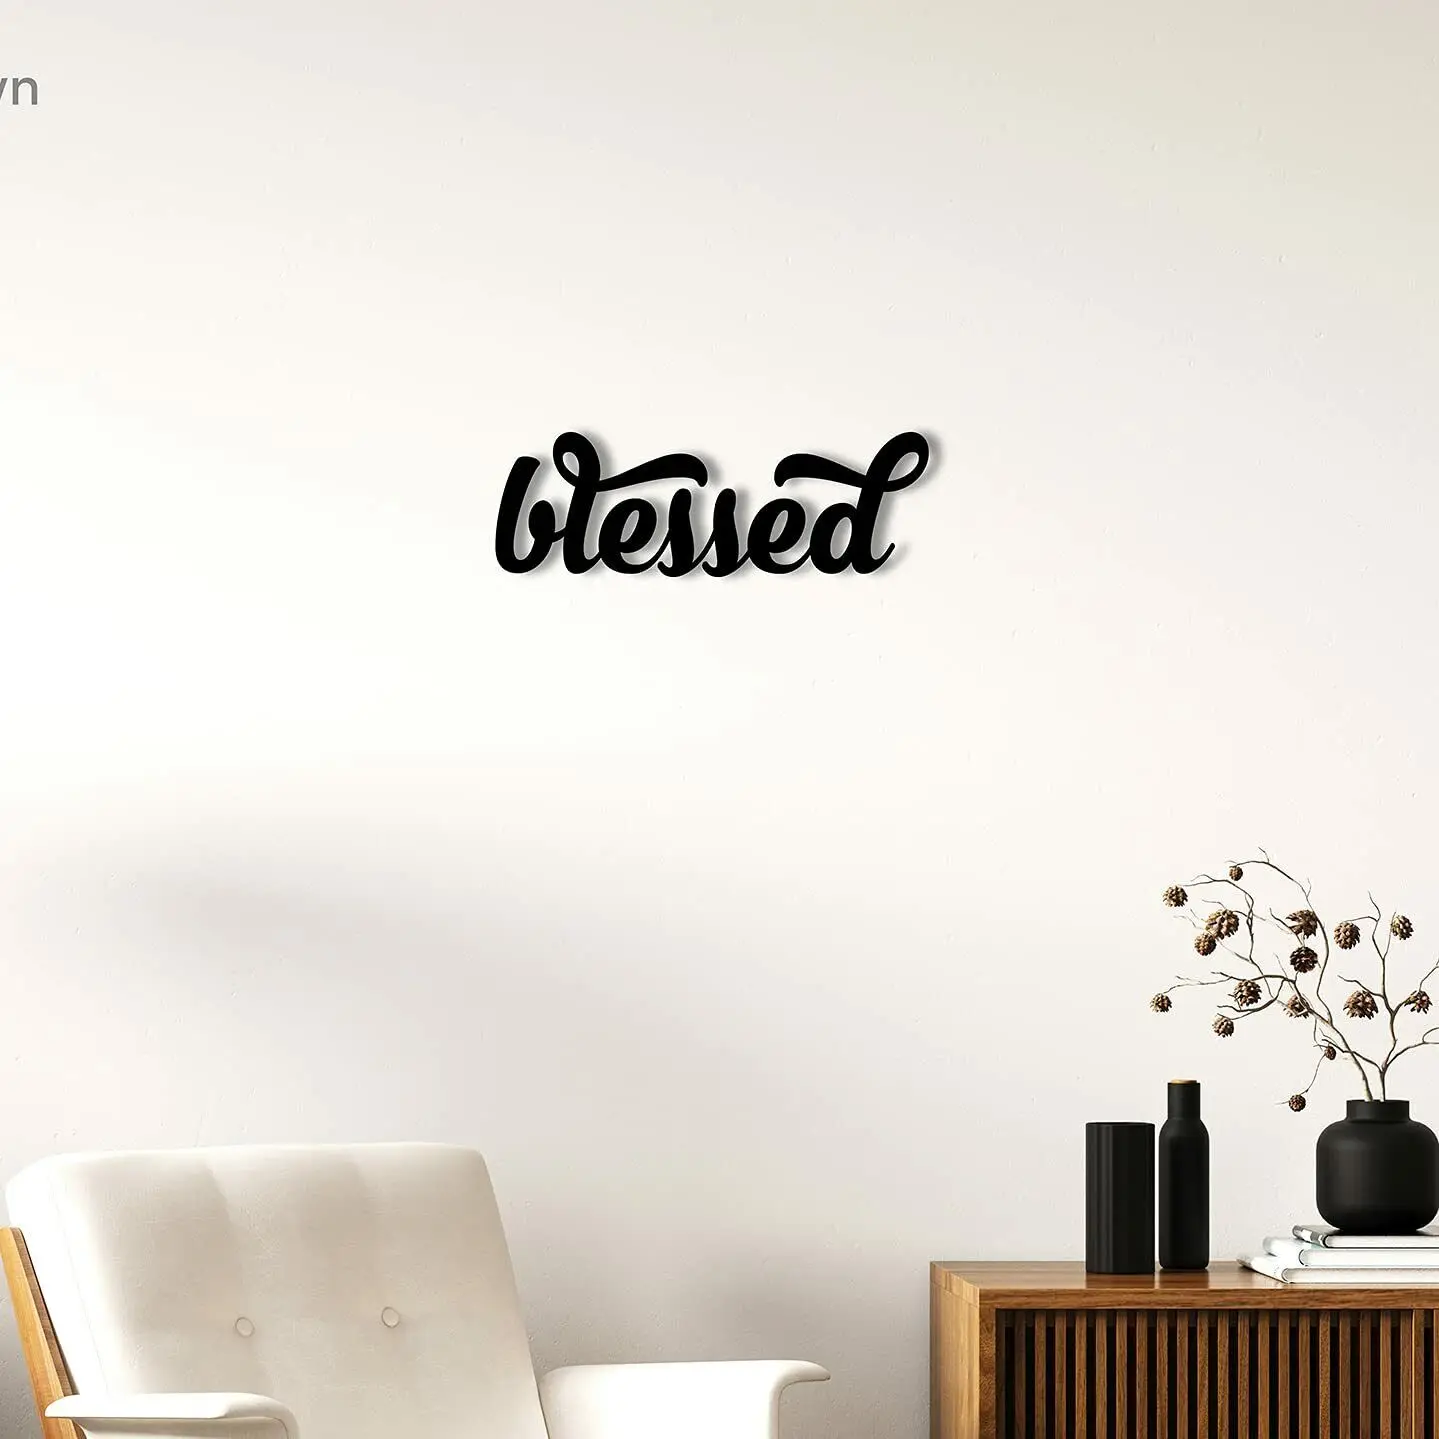 

Blessed - Beautiful Metal Home Décor Decorative Accent Metal Art Wall Sign Living Room/Home Decoration